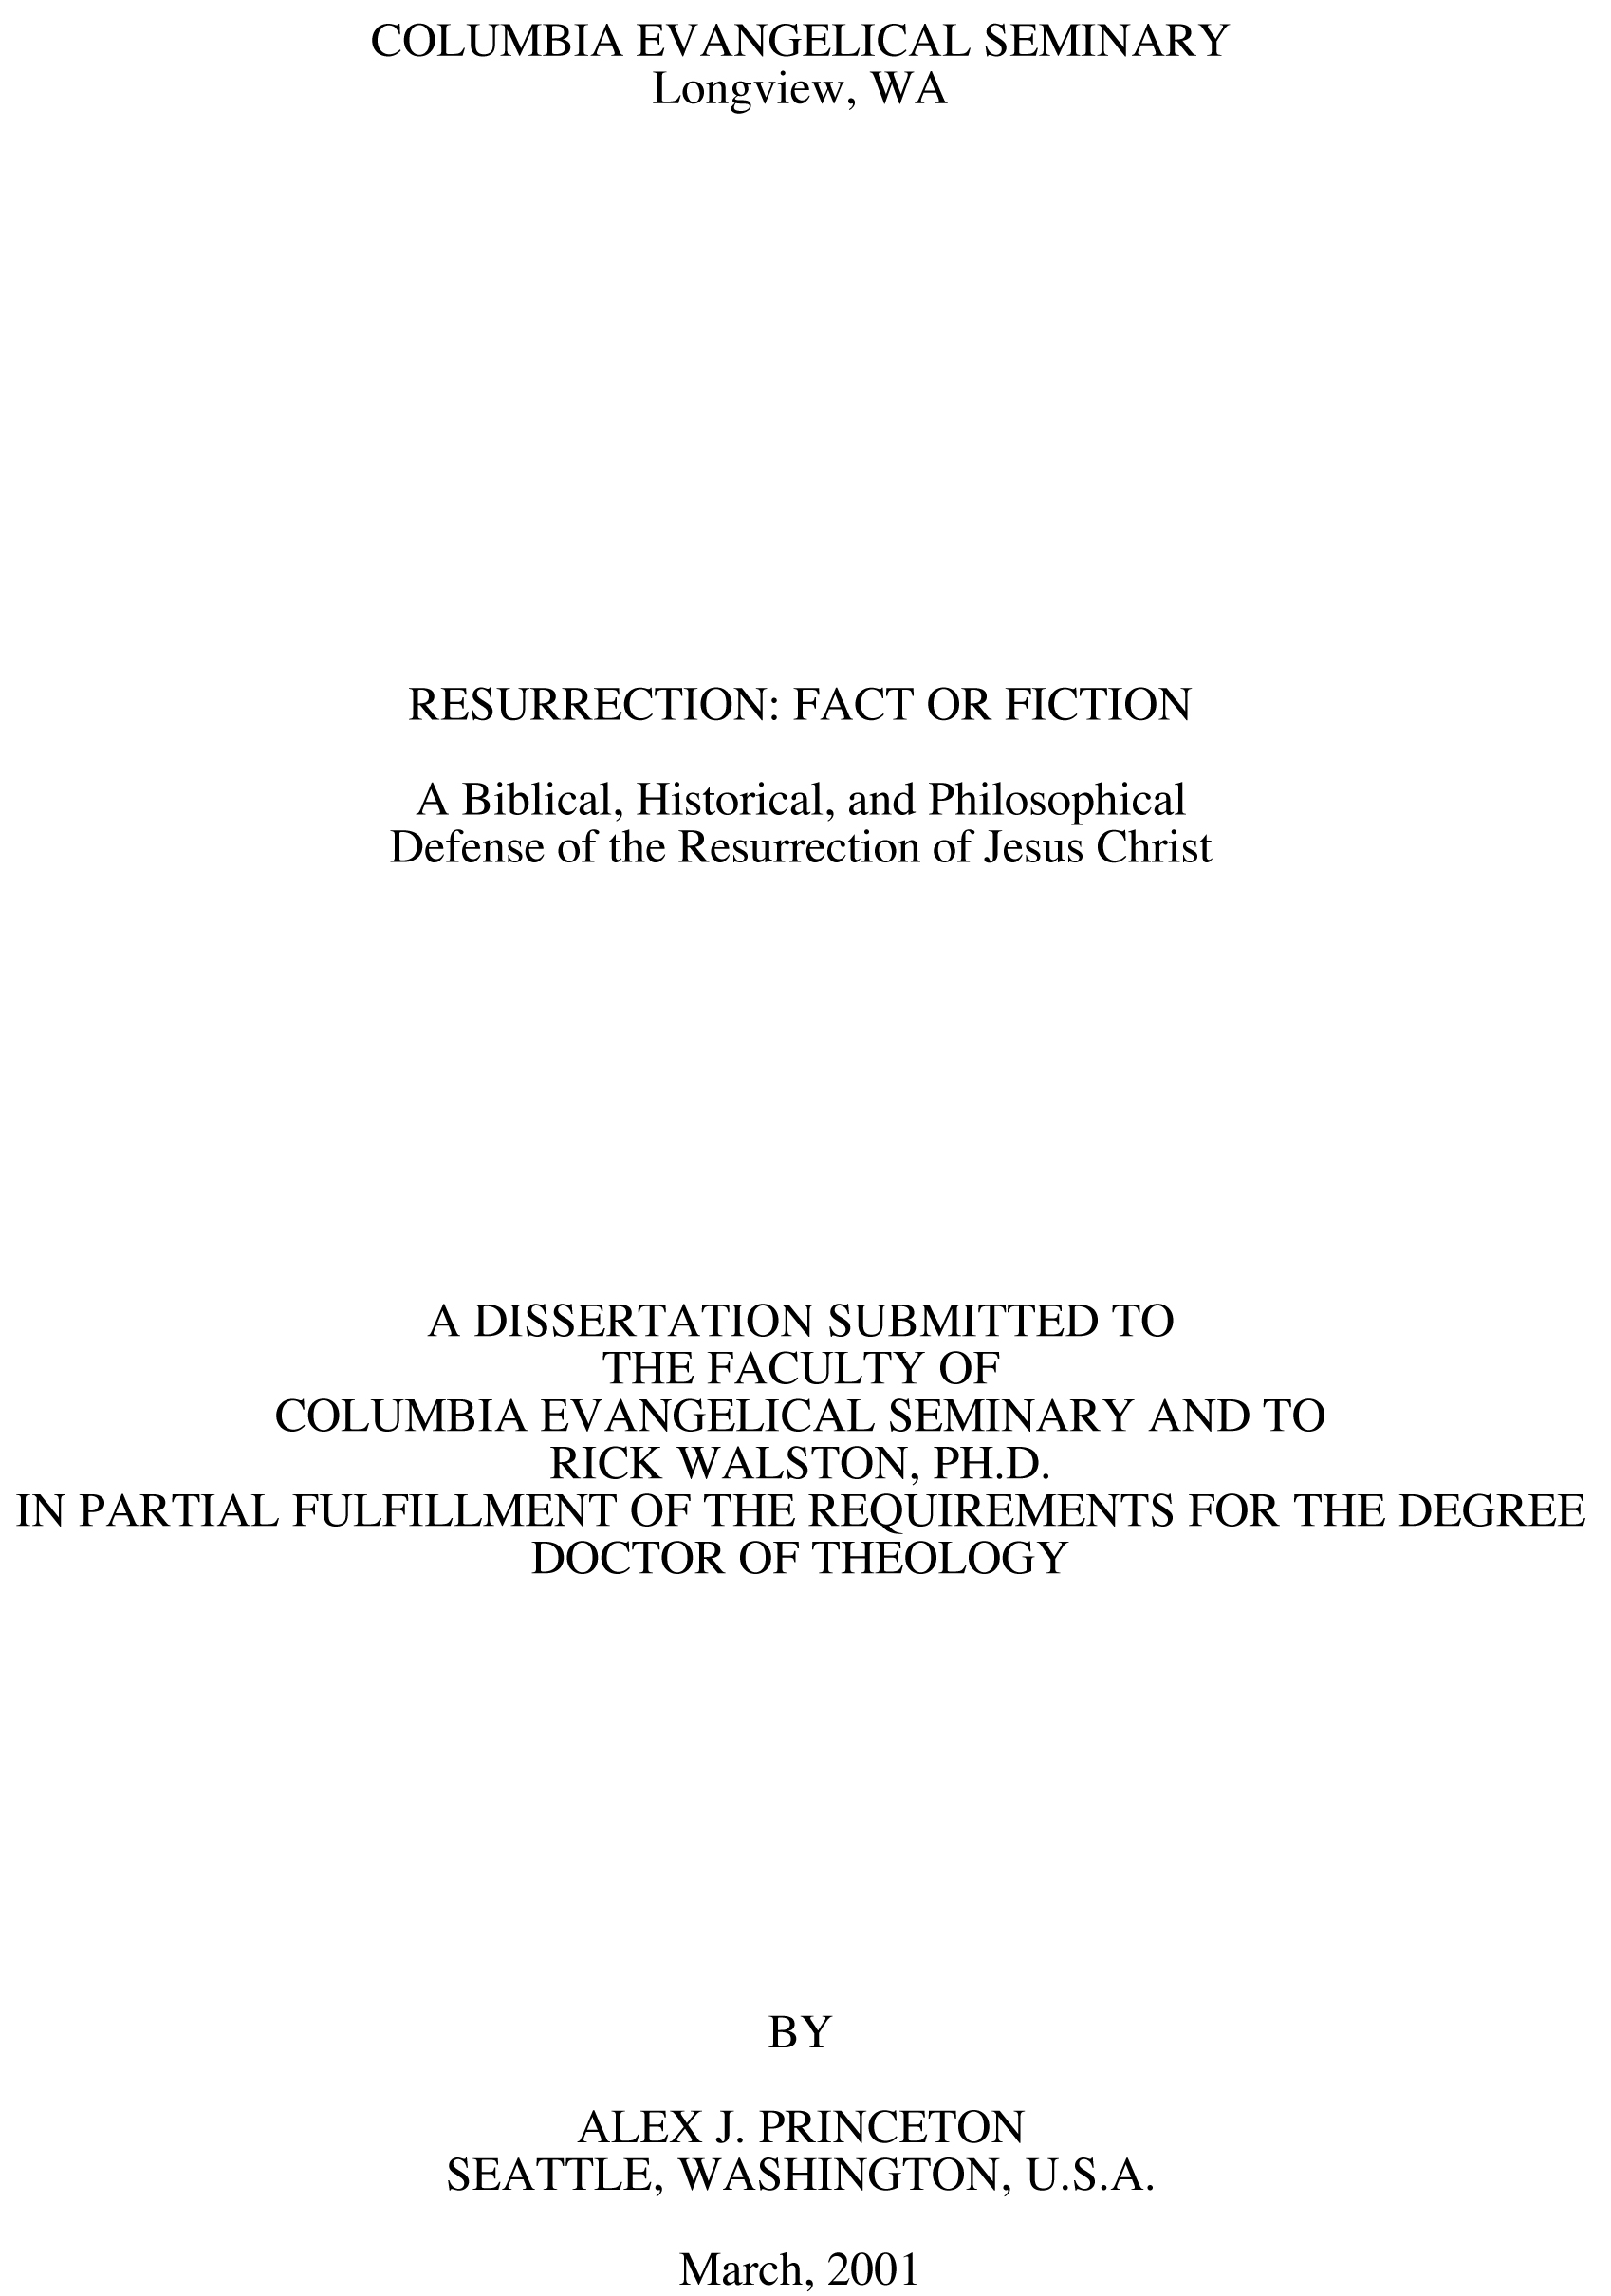 examples of historical research titles